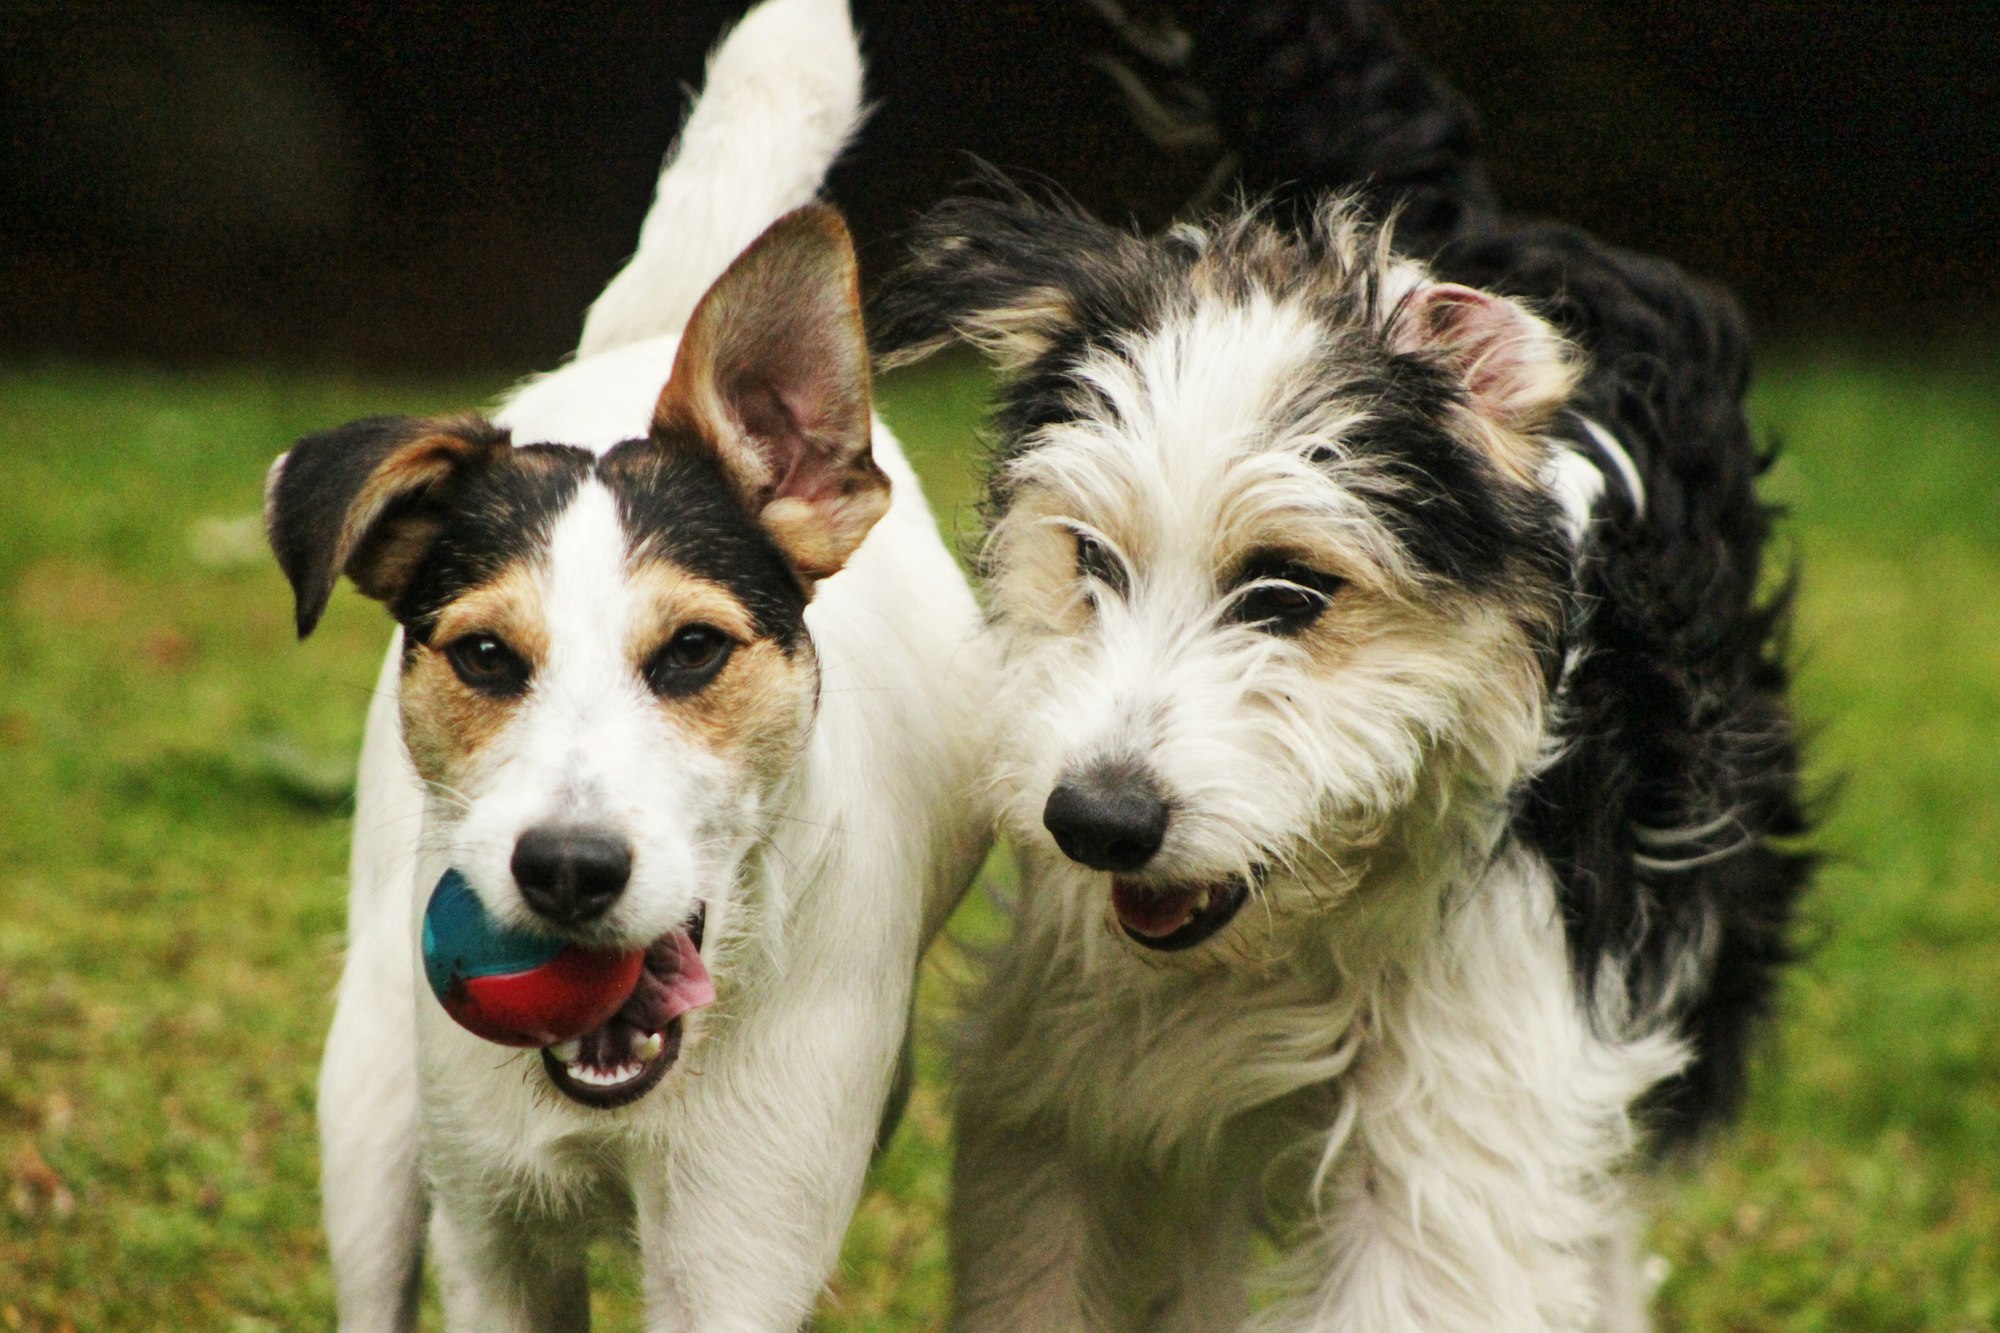 Two young dogs enjoying a game of ball.